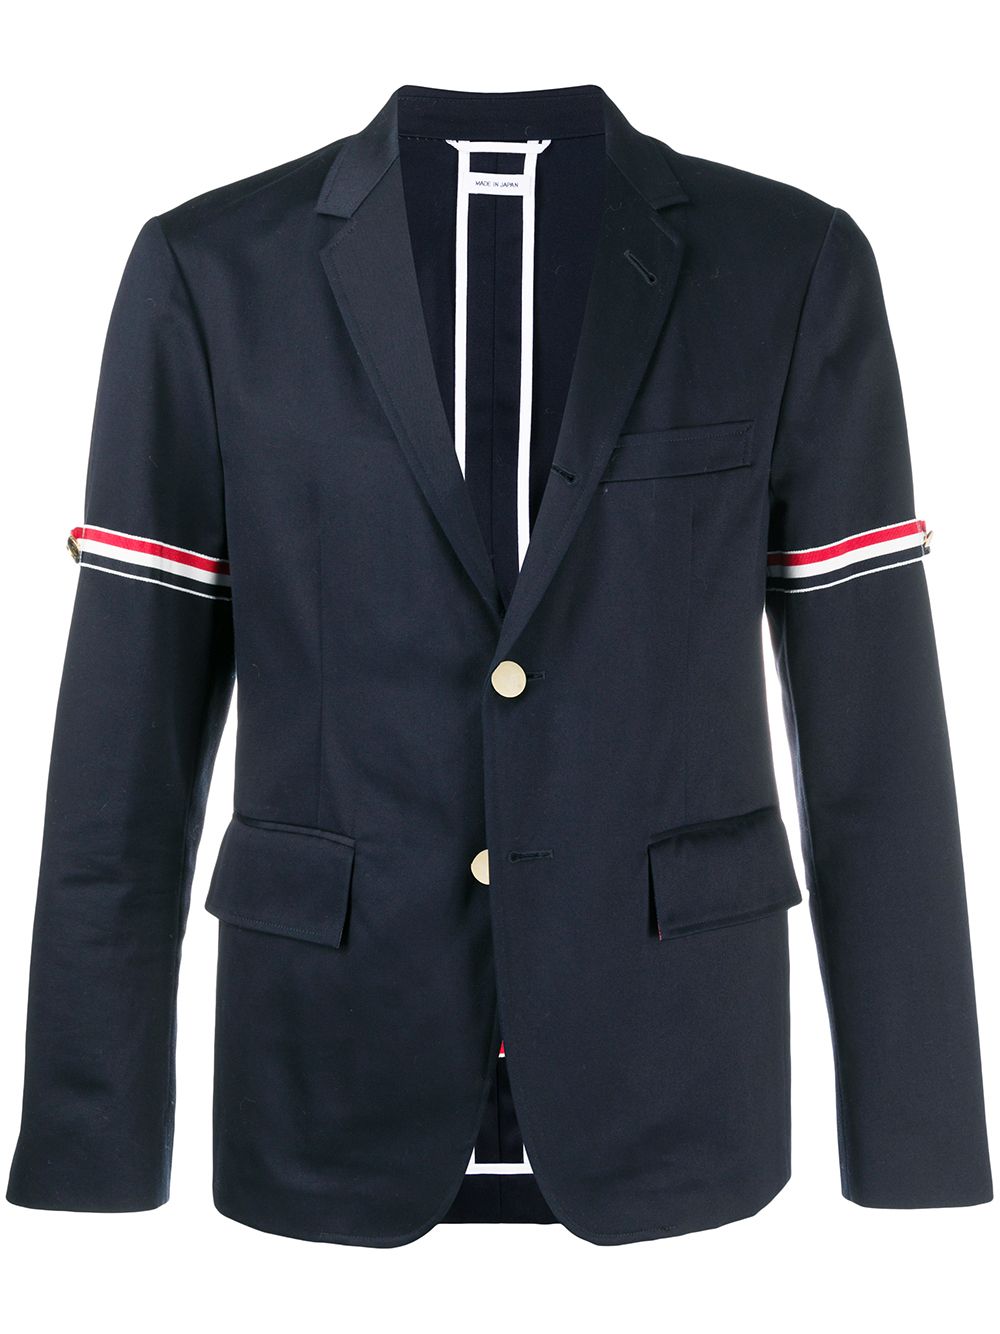 Image 1 of Thom Browne unconstructed grosgrain armband sport coat